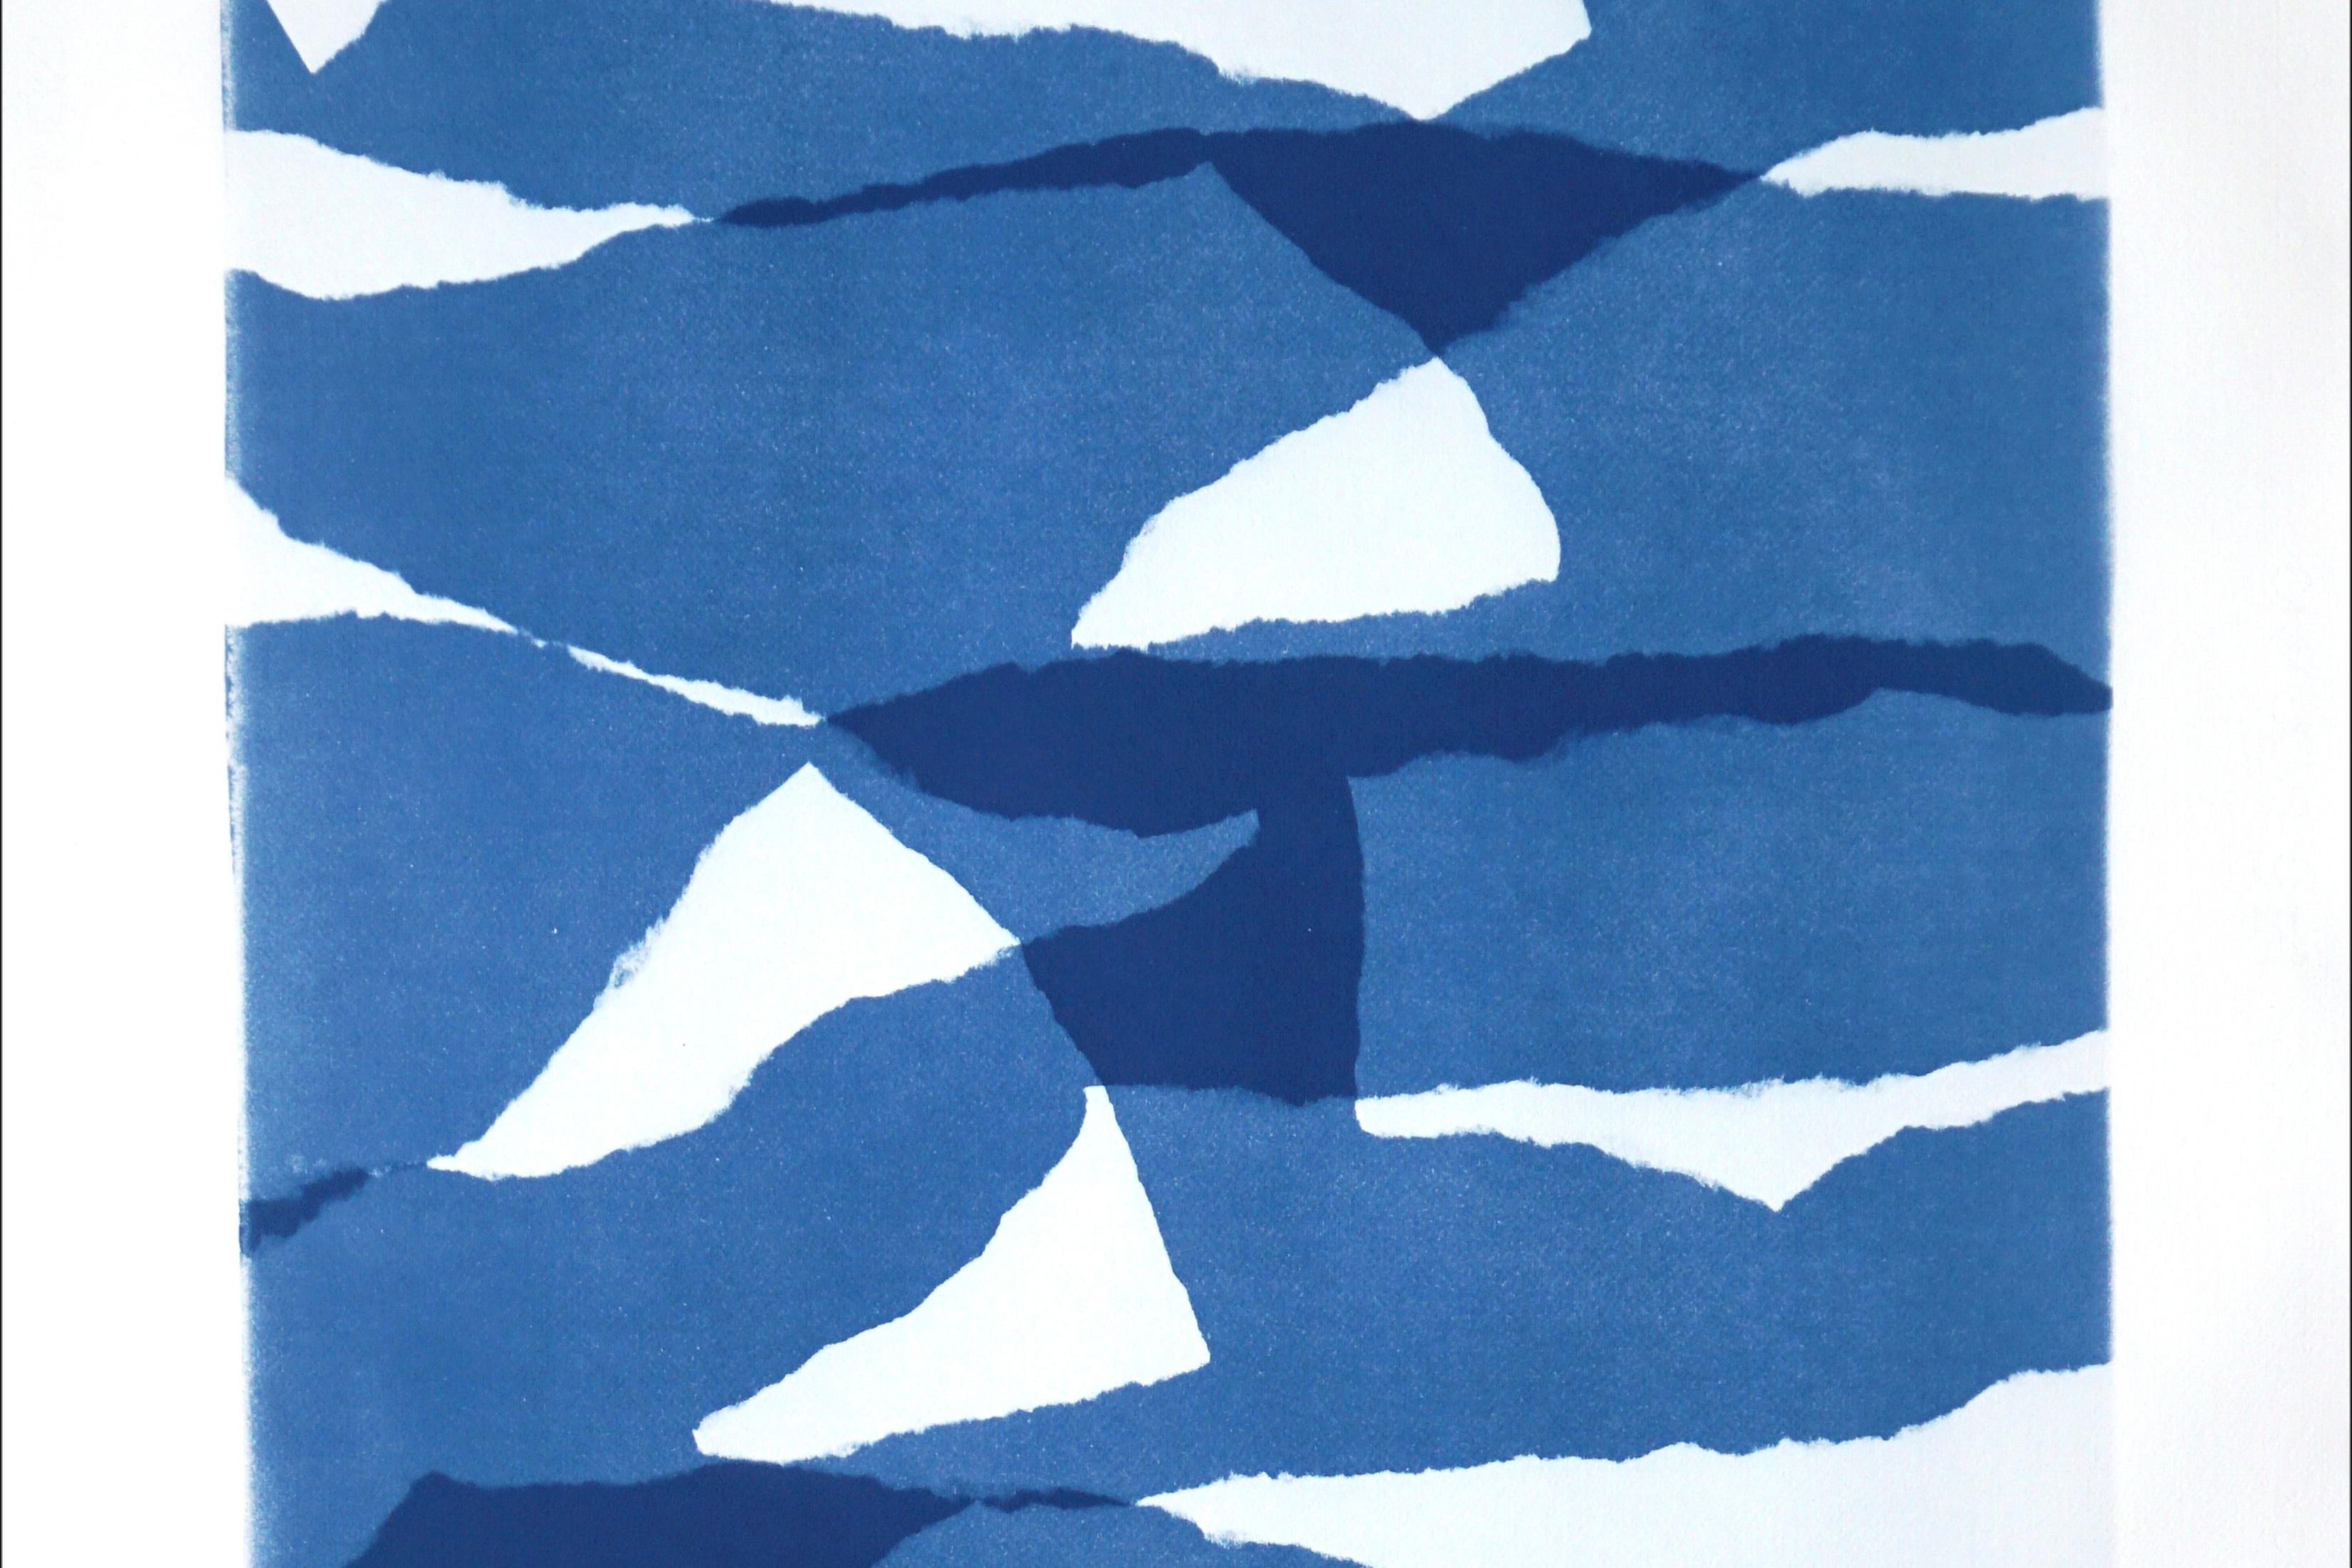 This is an exclusive handprinted unique cyanotype that takes its inspiration from the mid-century modern shapes.
It's made by layering paper cutouts and different exposures using uv-light. 

Details:
+ Title: Layered Torn Paper II
+ Year: 2022
+